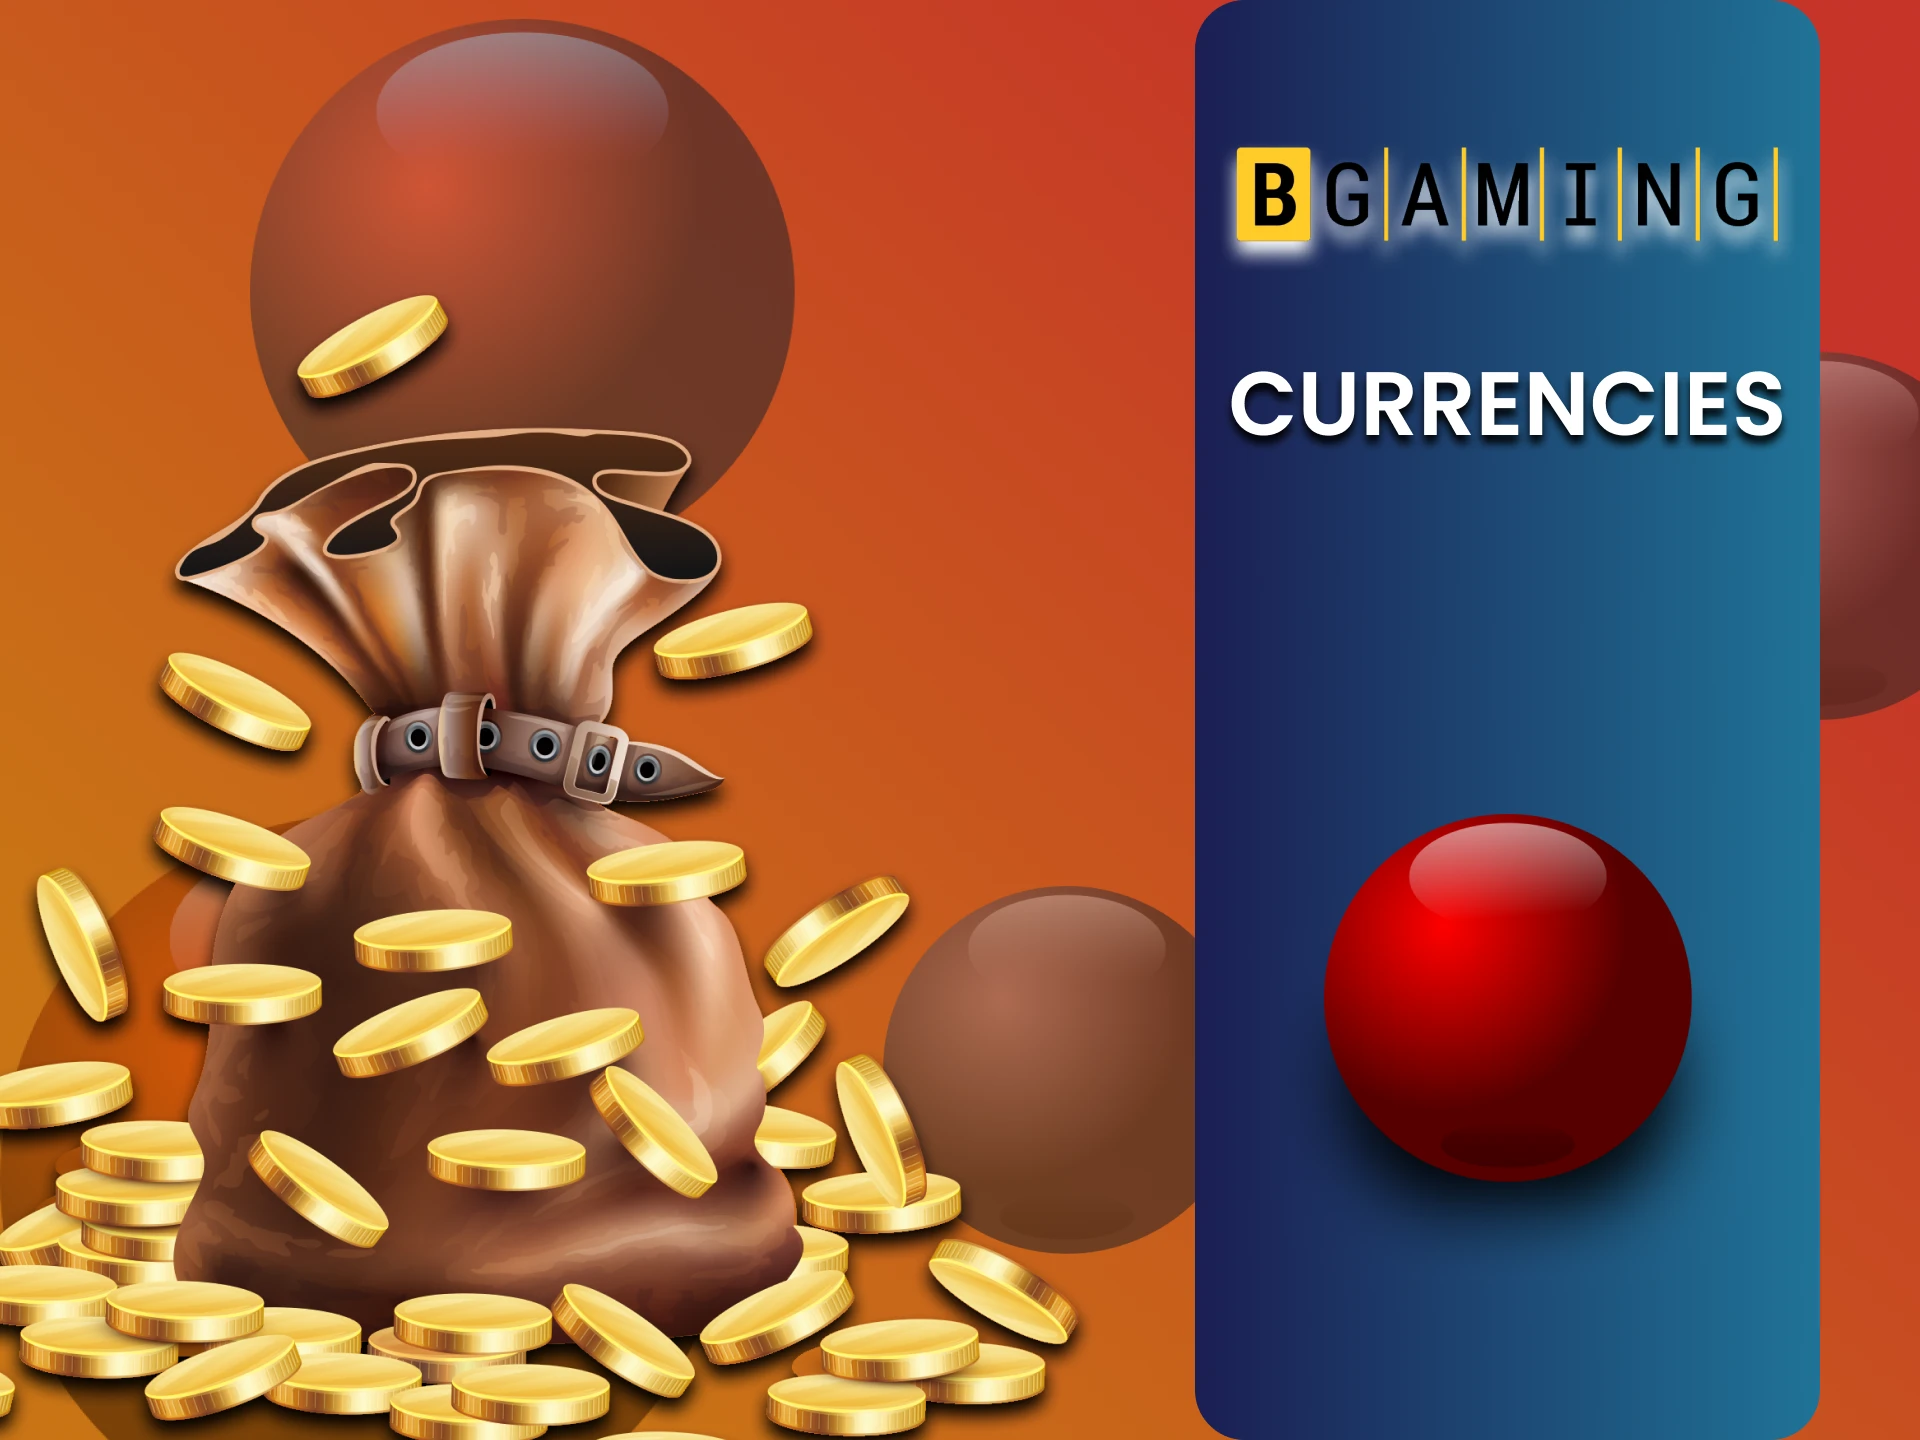 We will tell you what currencies BGaming uses.